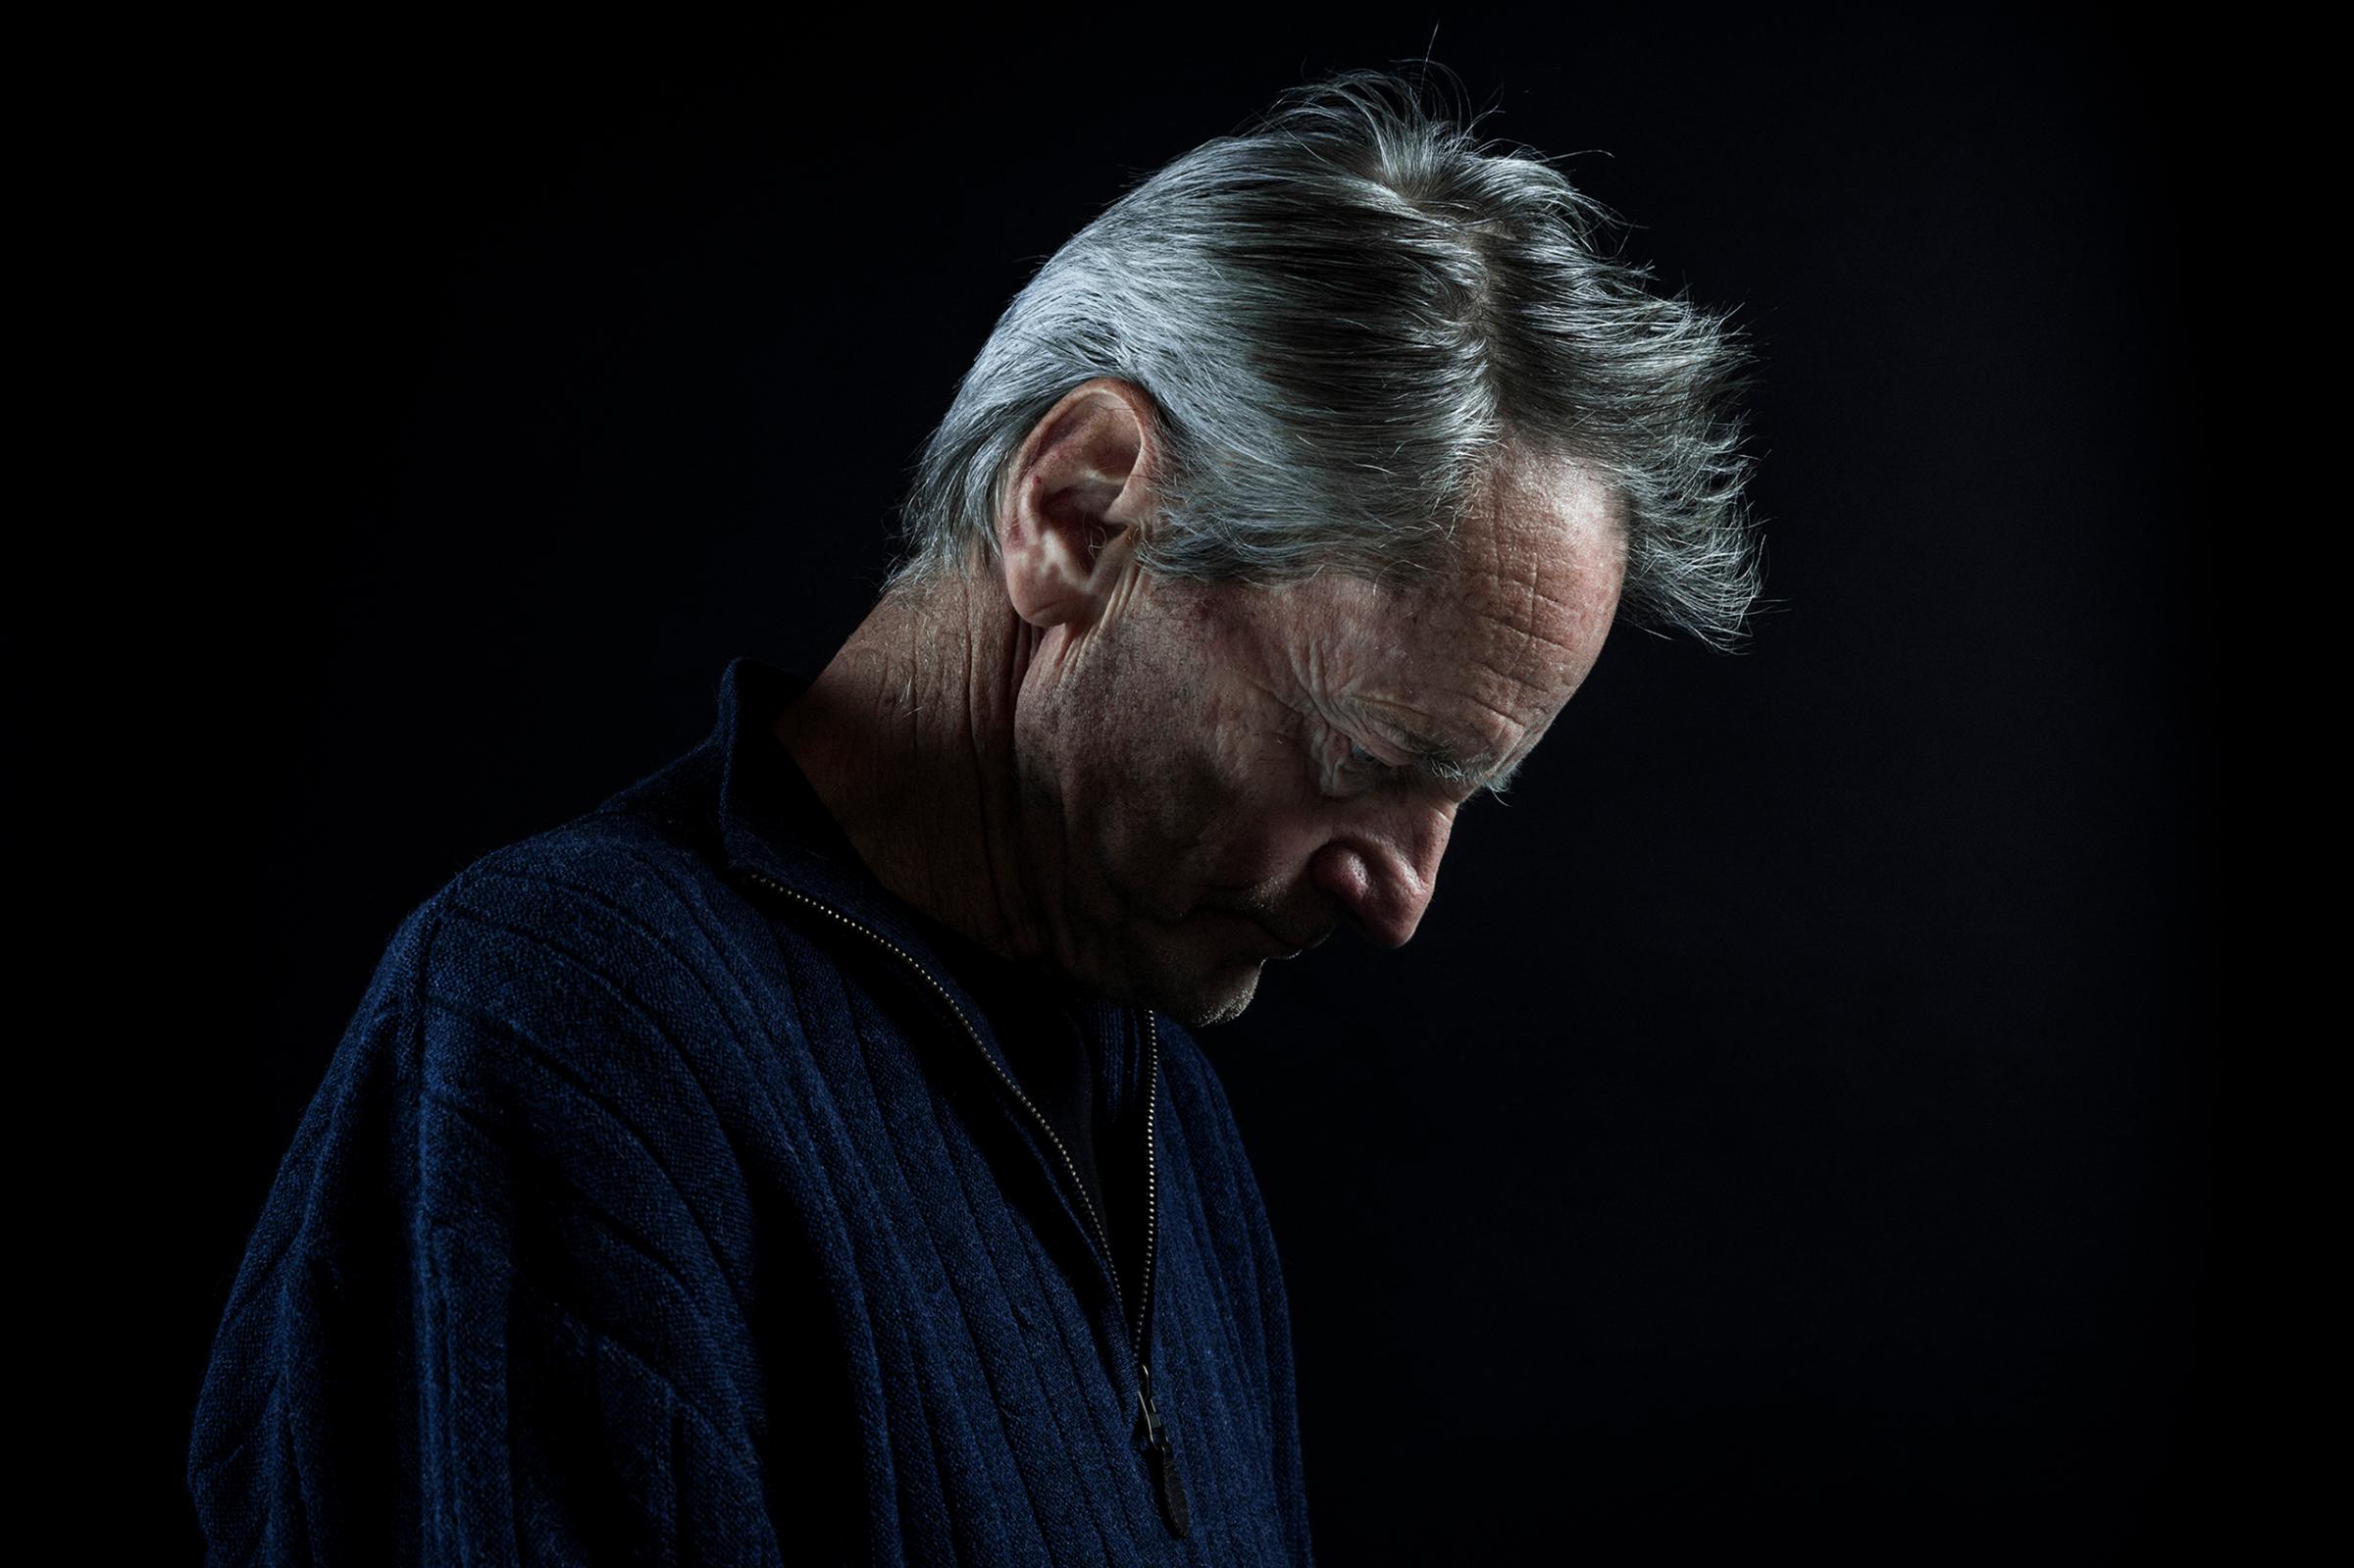 Playwright and actor Sam Shepard on a day of rehearsal for his play "Buried Child," which won the Pulitzer Prize in 1979, at a studio in New York.